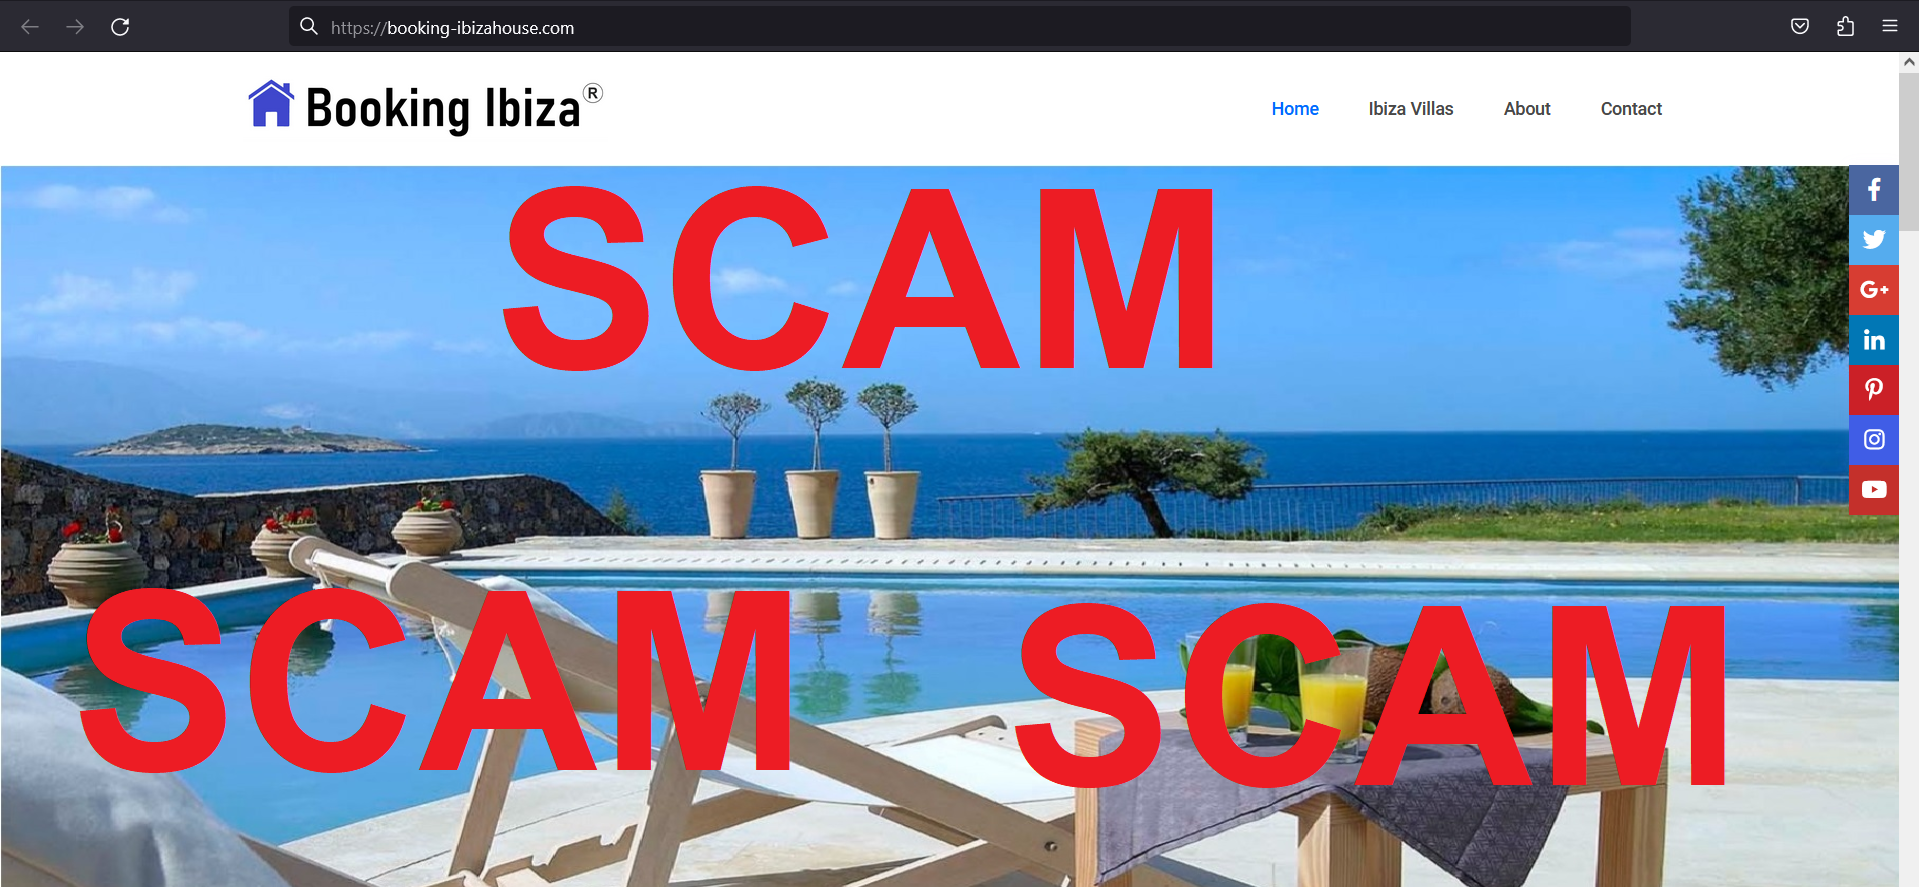 You are currently viewing Fraudulent website: booking-ibizahouse.com SCAM SCAM